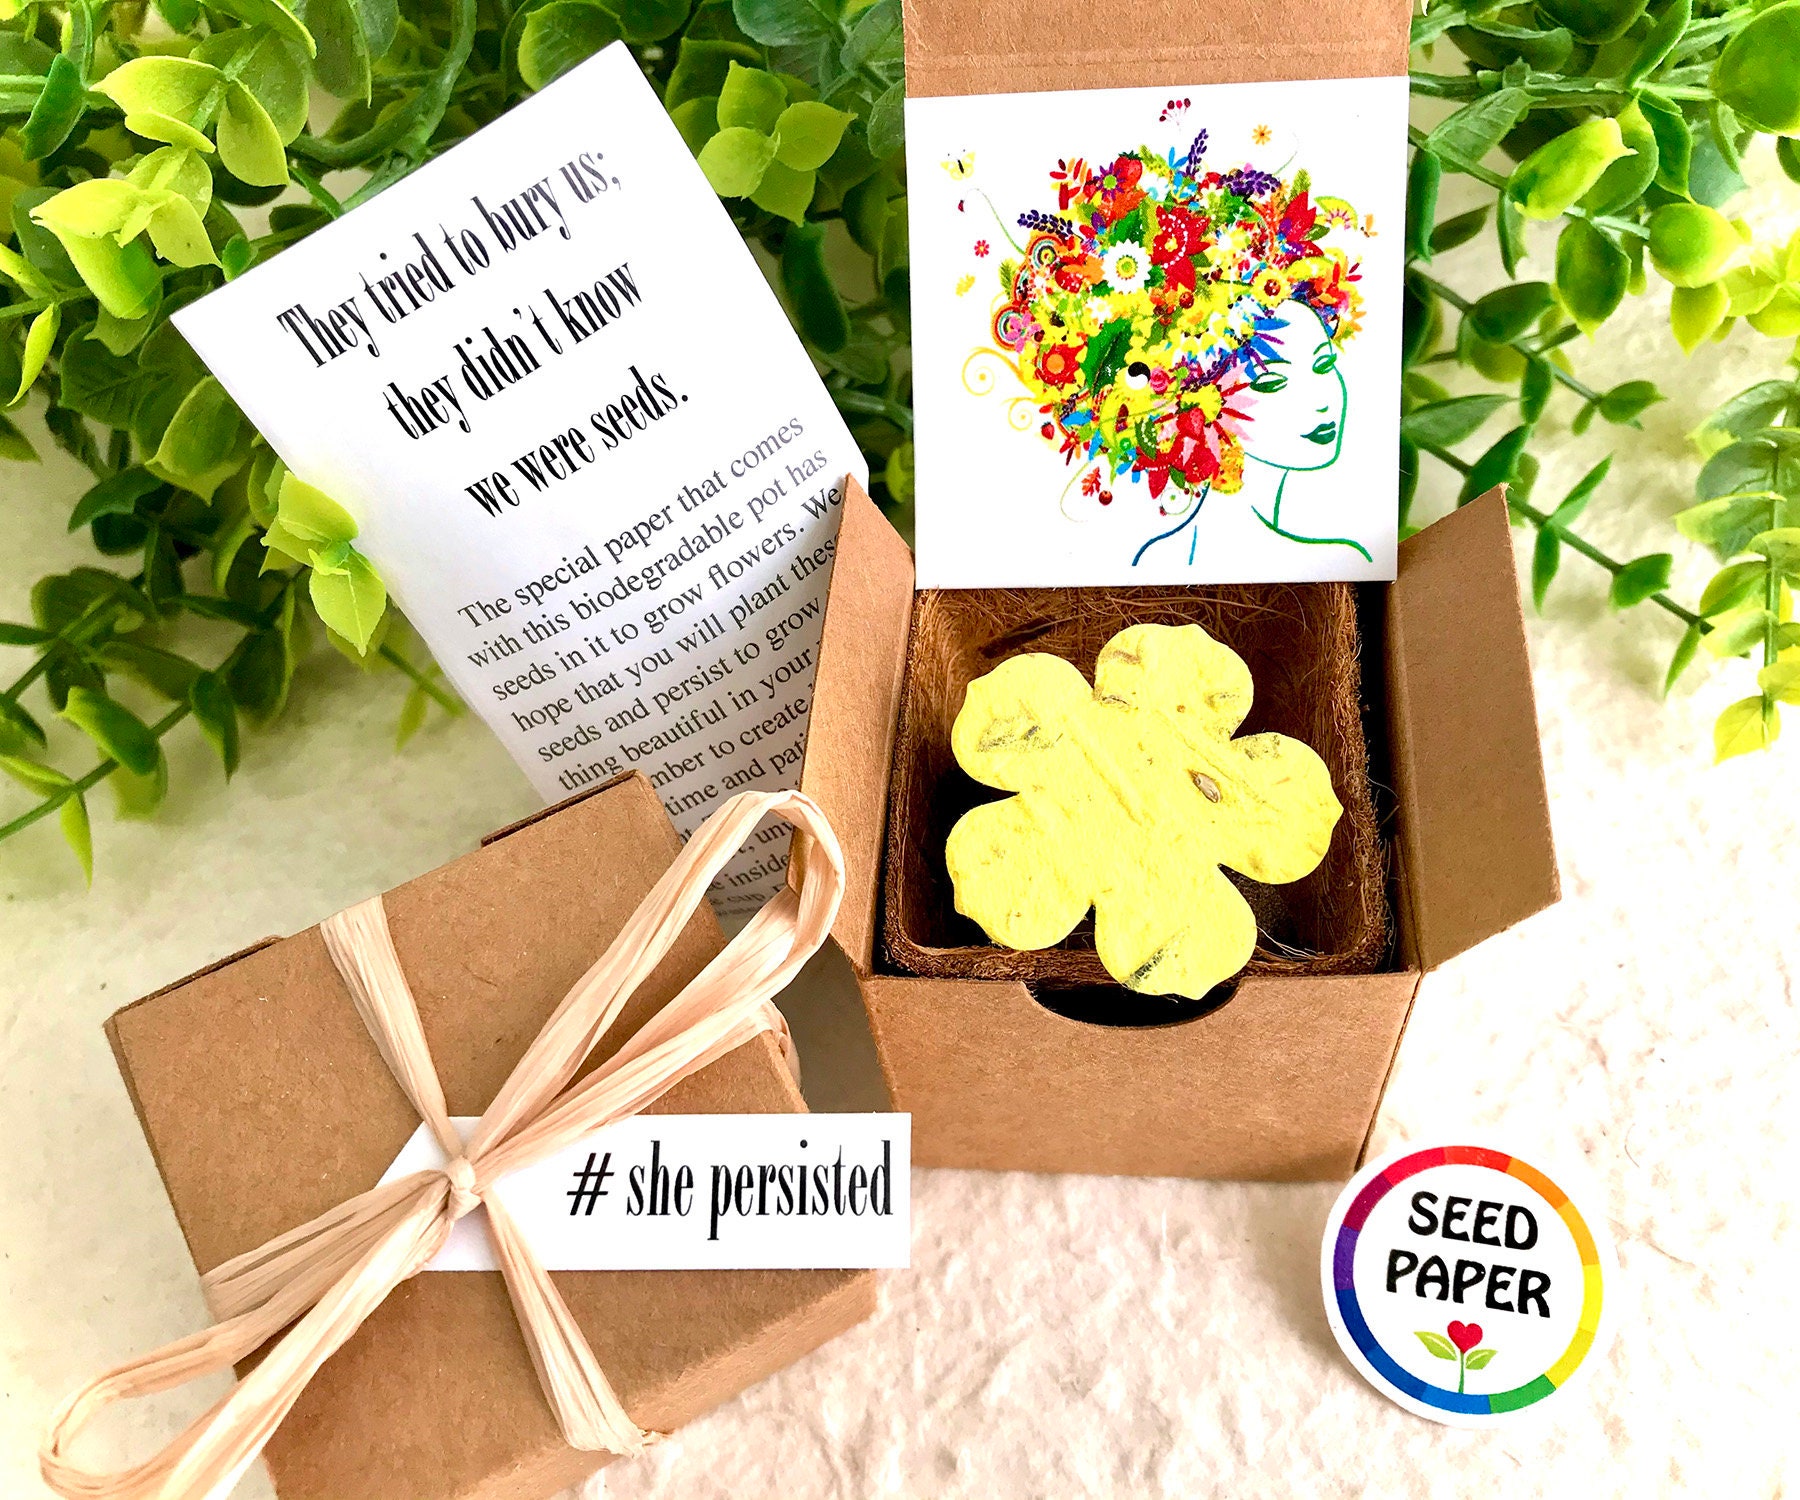 10 Flower Seed Embedded Plantable Paper Leaves – Recycled Ideas Favors